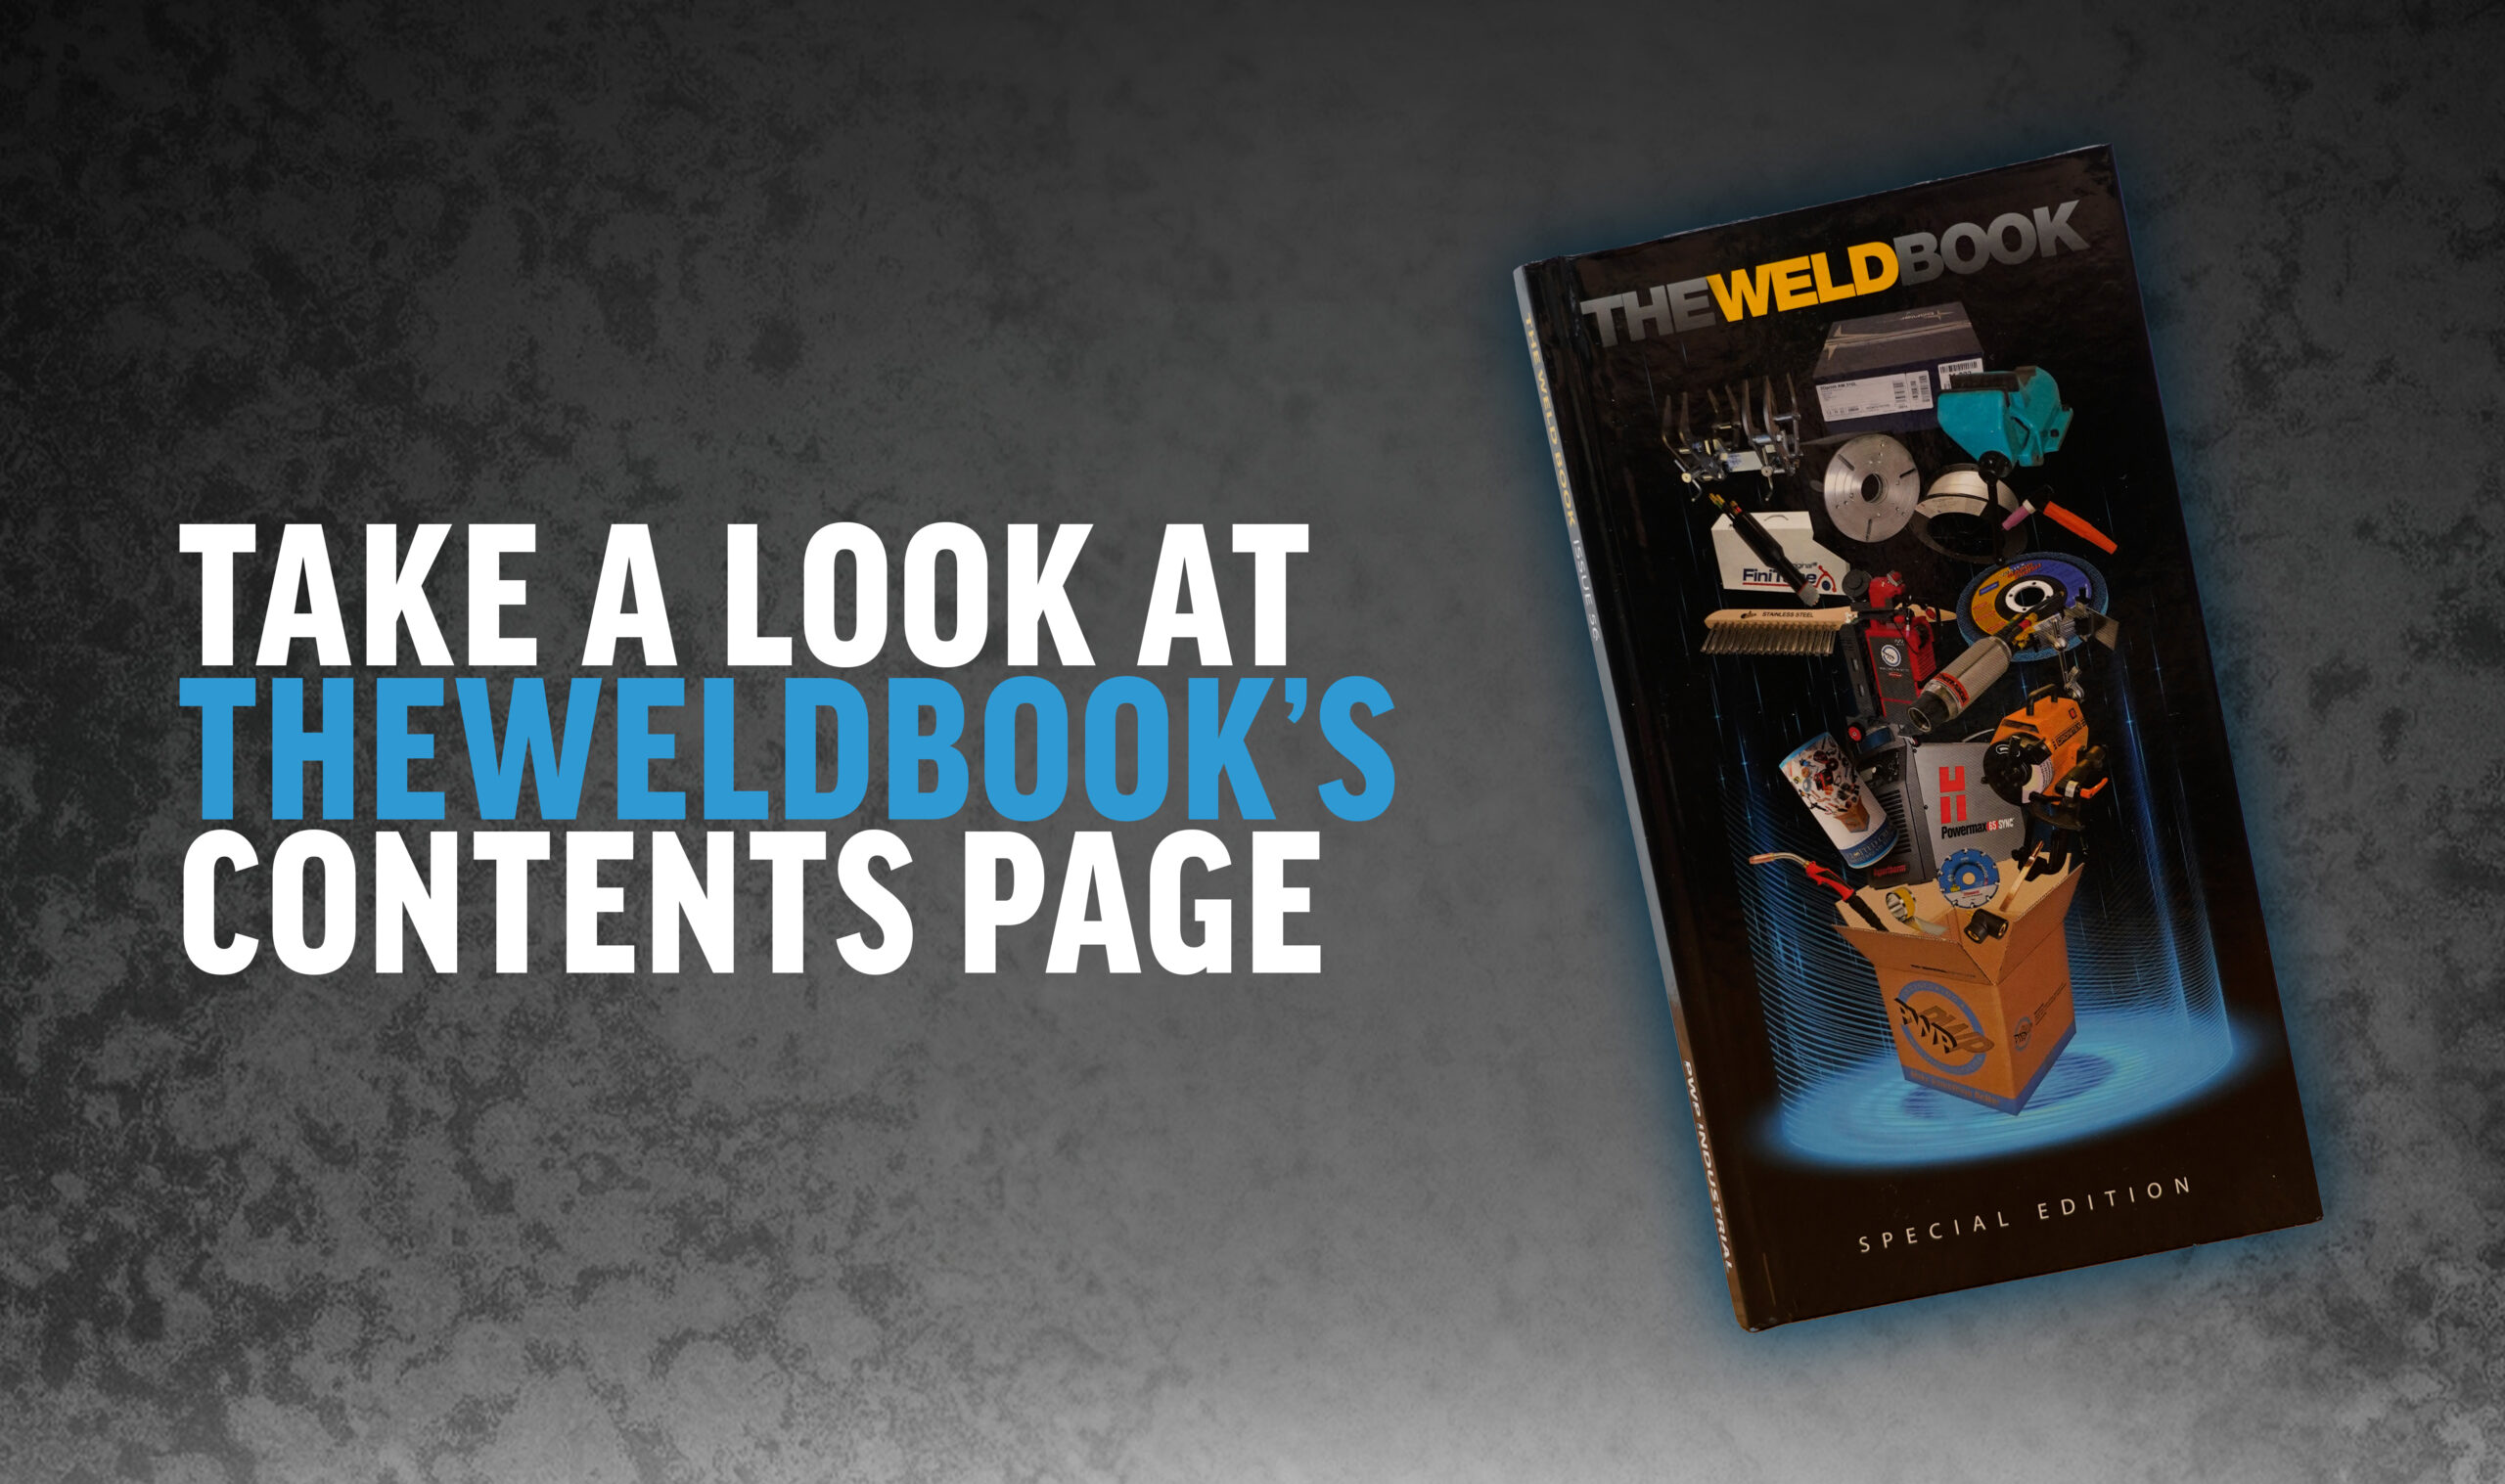 The Weld Book 56 Contents Page